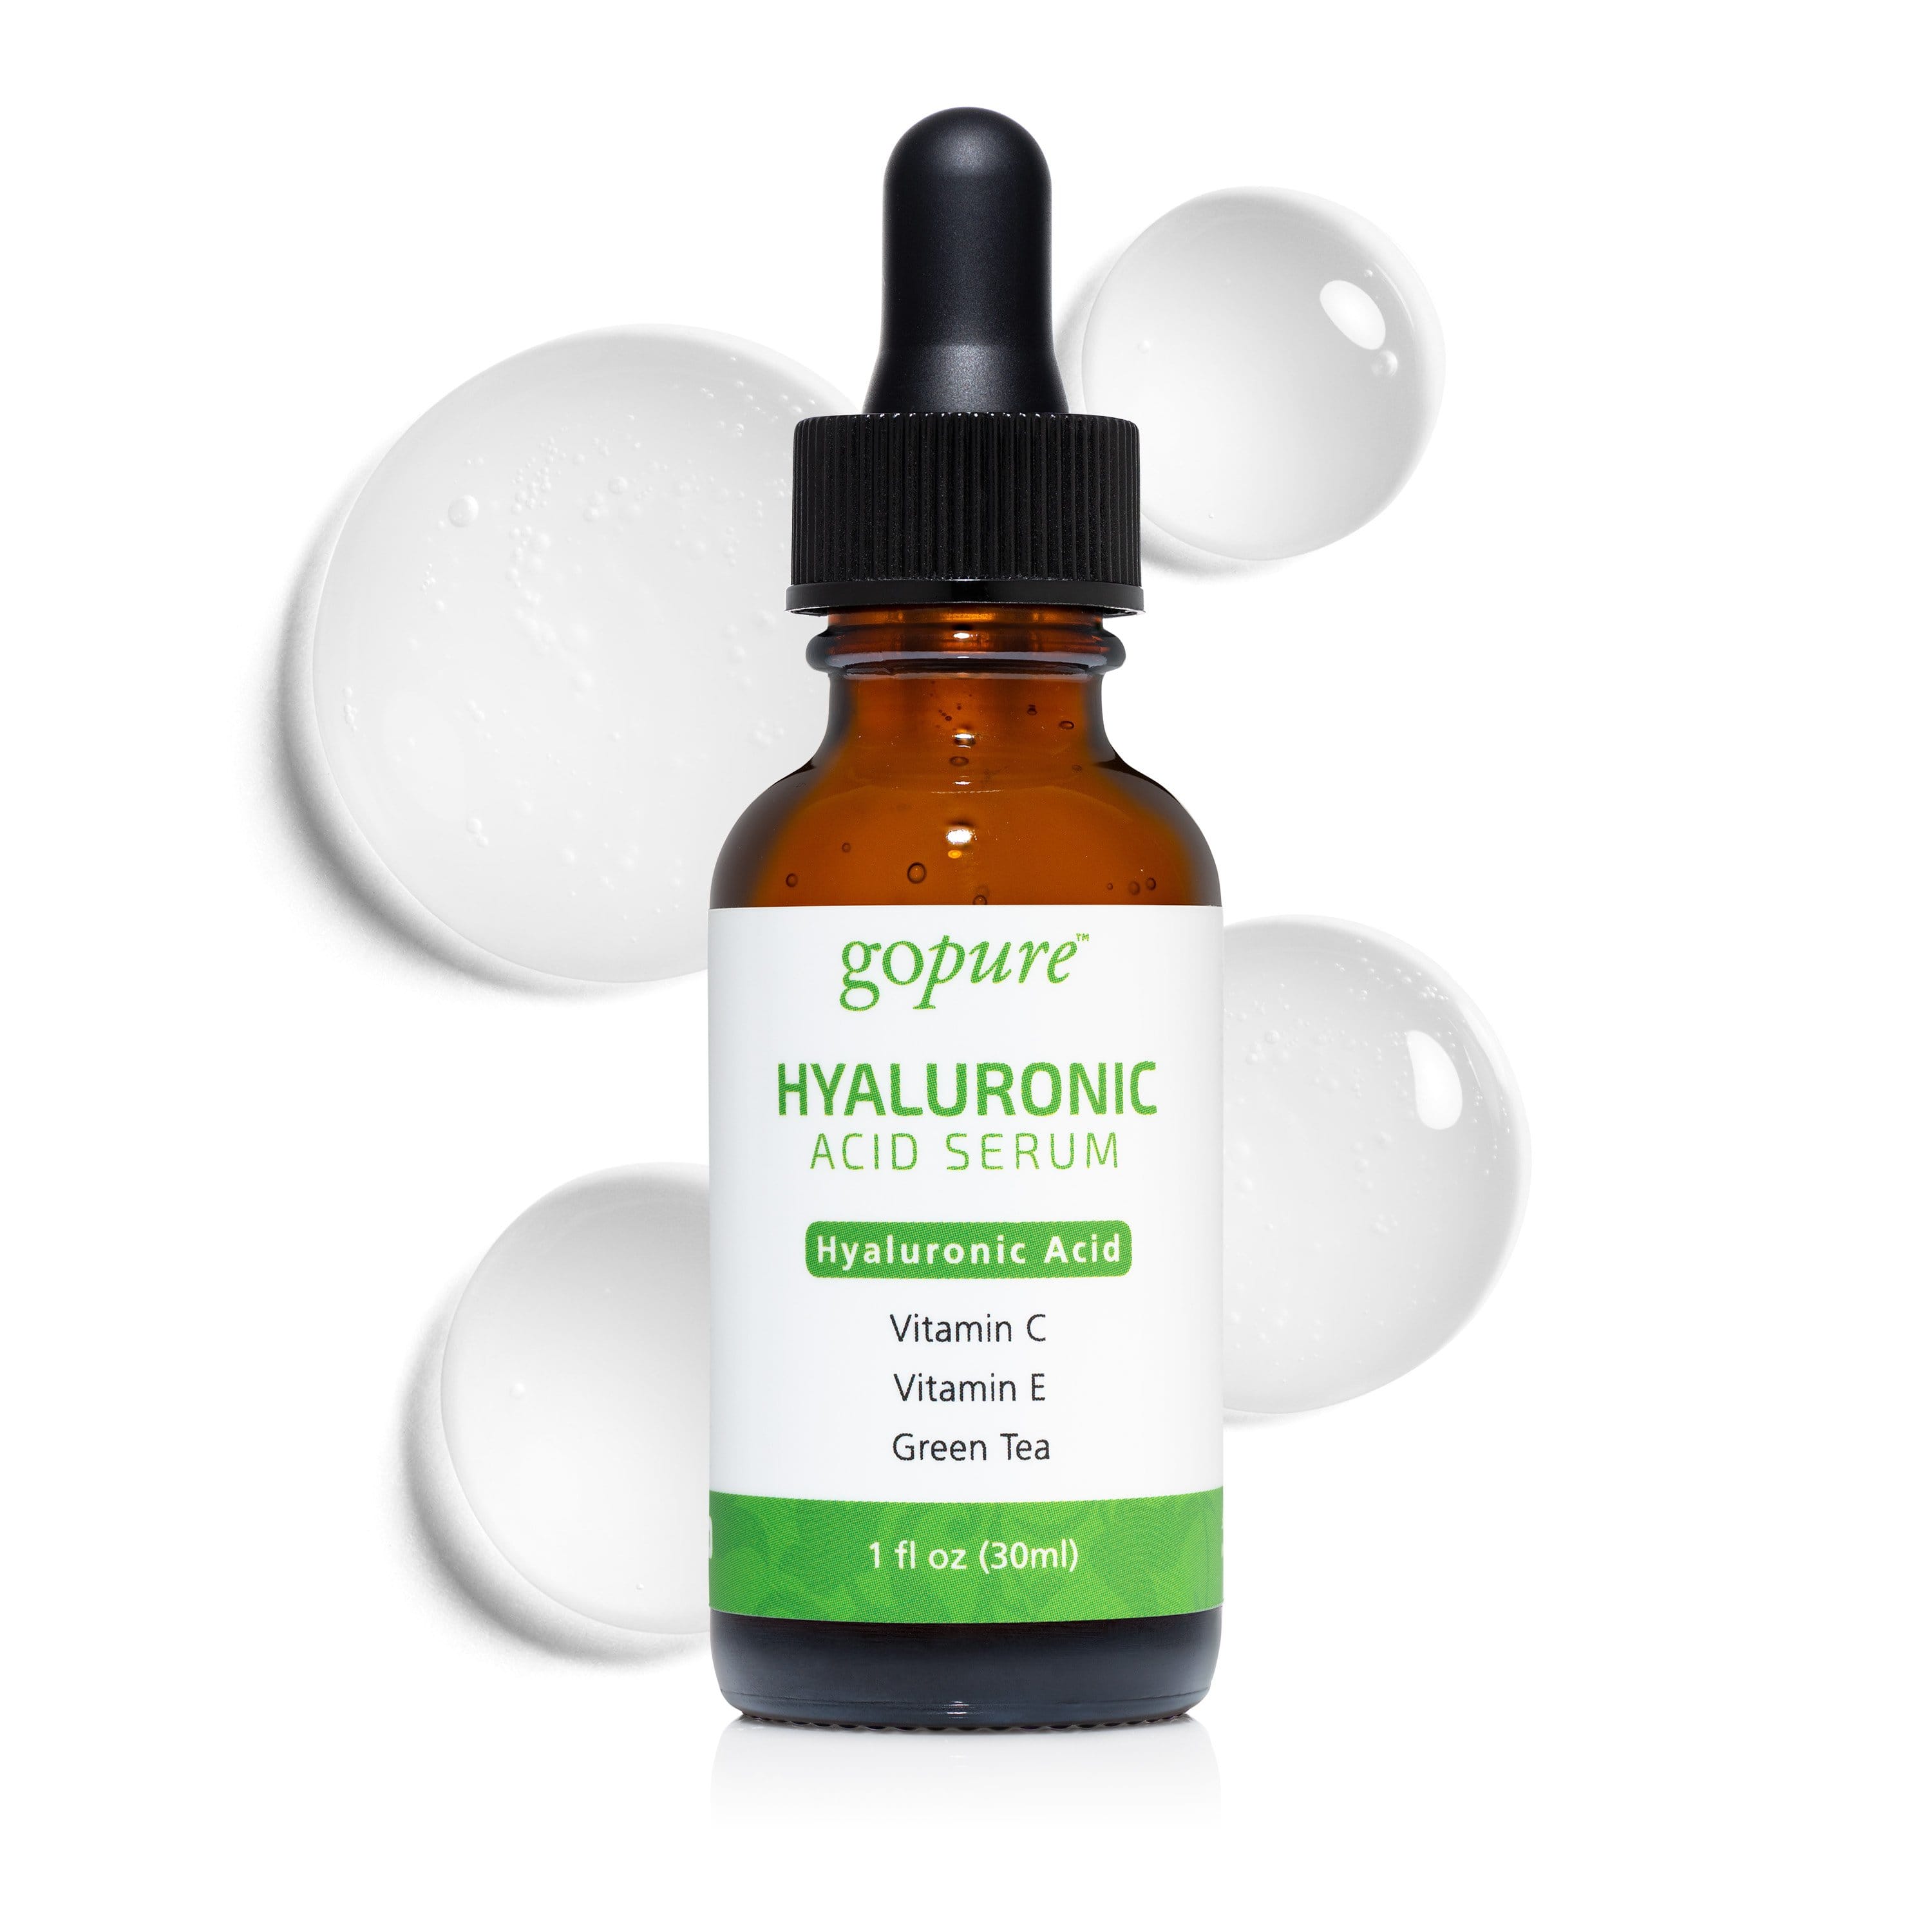 goPure Hyaluronic Acid Serum for Face with Jojoba Oil - Natural-Glow Pure Hyaluronic Acid Serum - Dark Spot Remover for Face - Hyaluronic Acid for Glowing Face (Acido Hialuronico) - 1oz